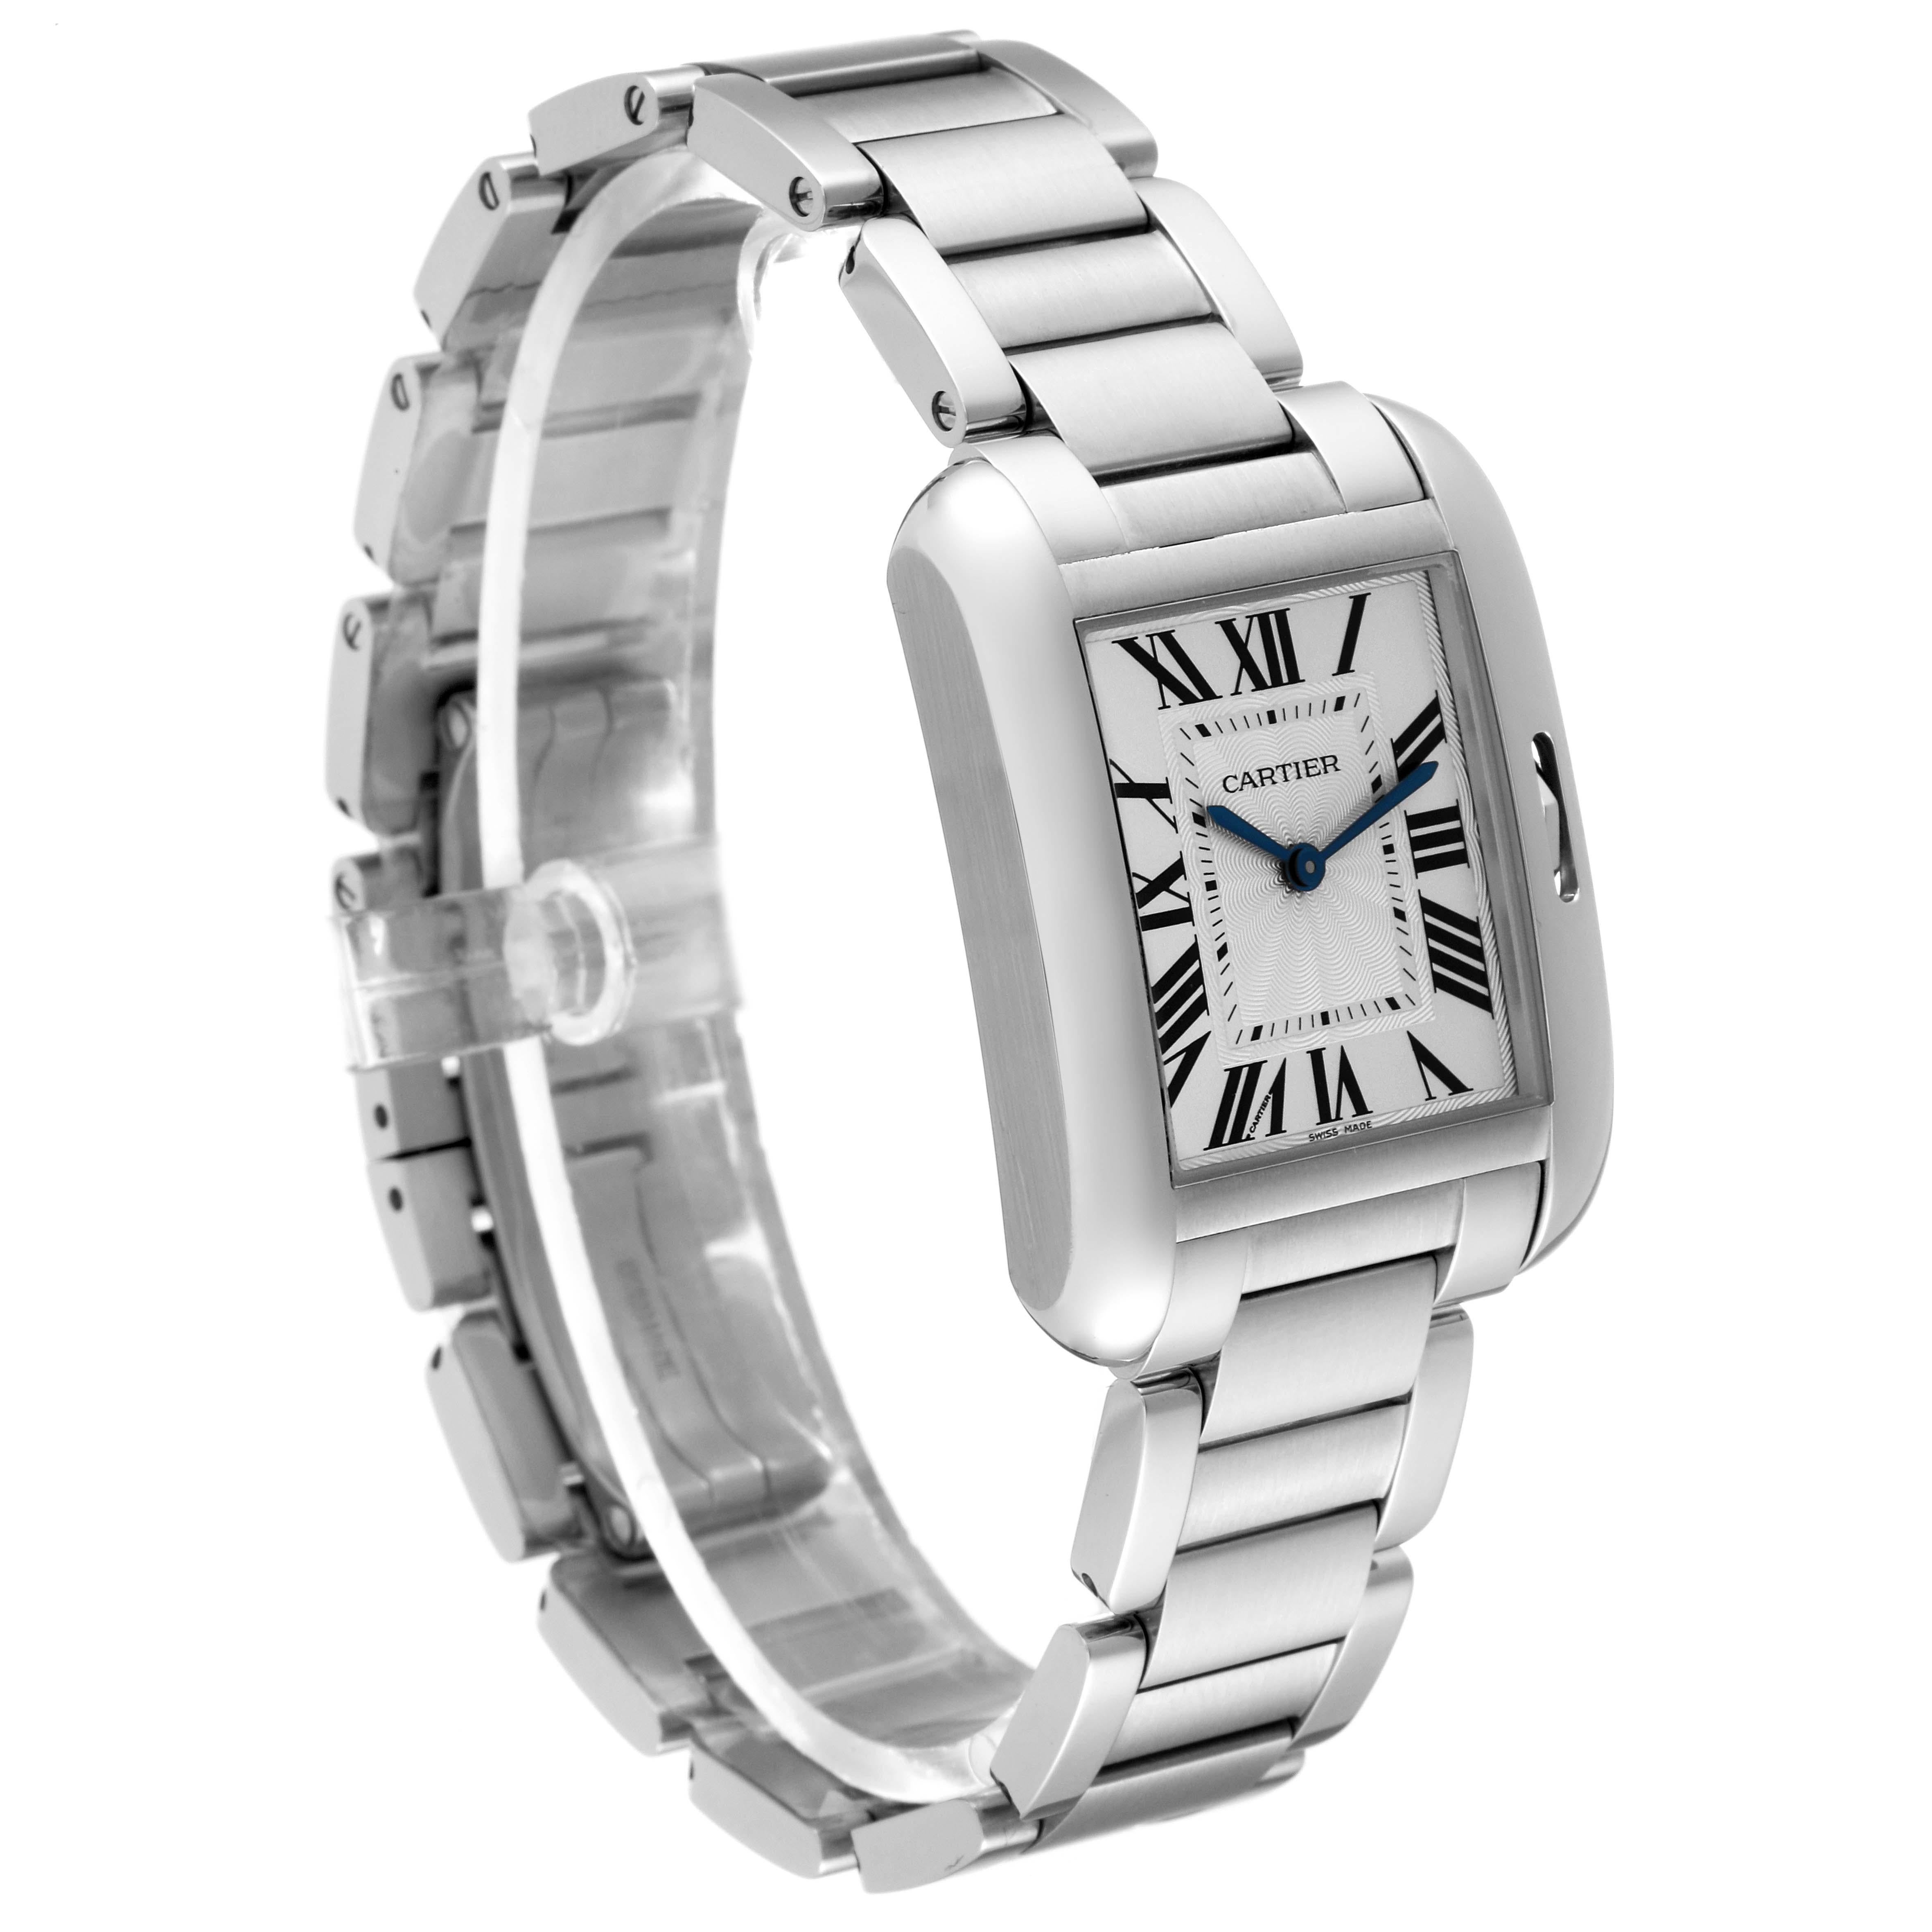 Cartier Tank Anglaise Midsize Steel Ladies Watch W5310044 Box Card In Excellent Condition For Sale In Atlanta, GA